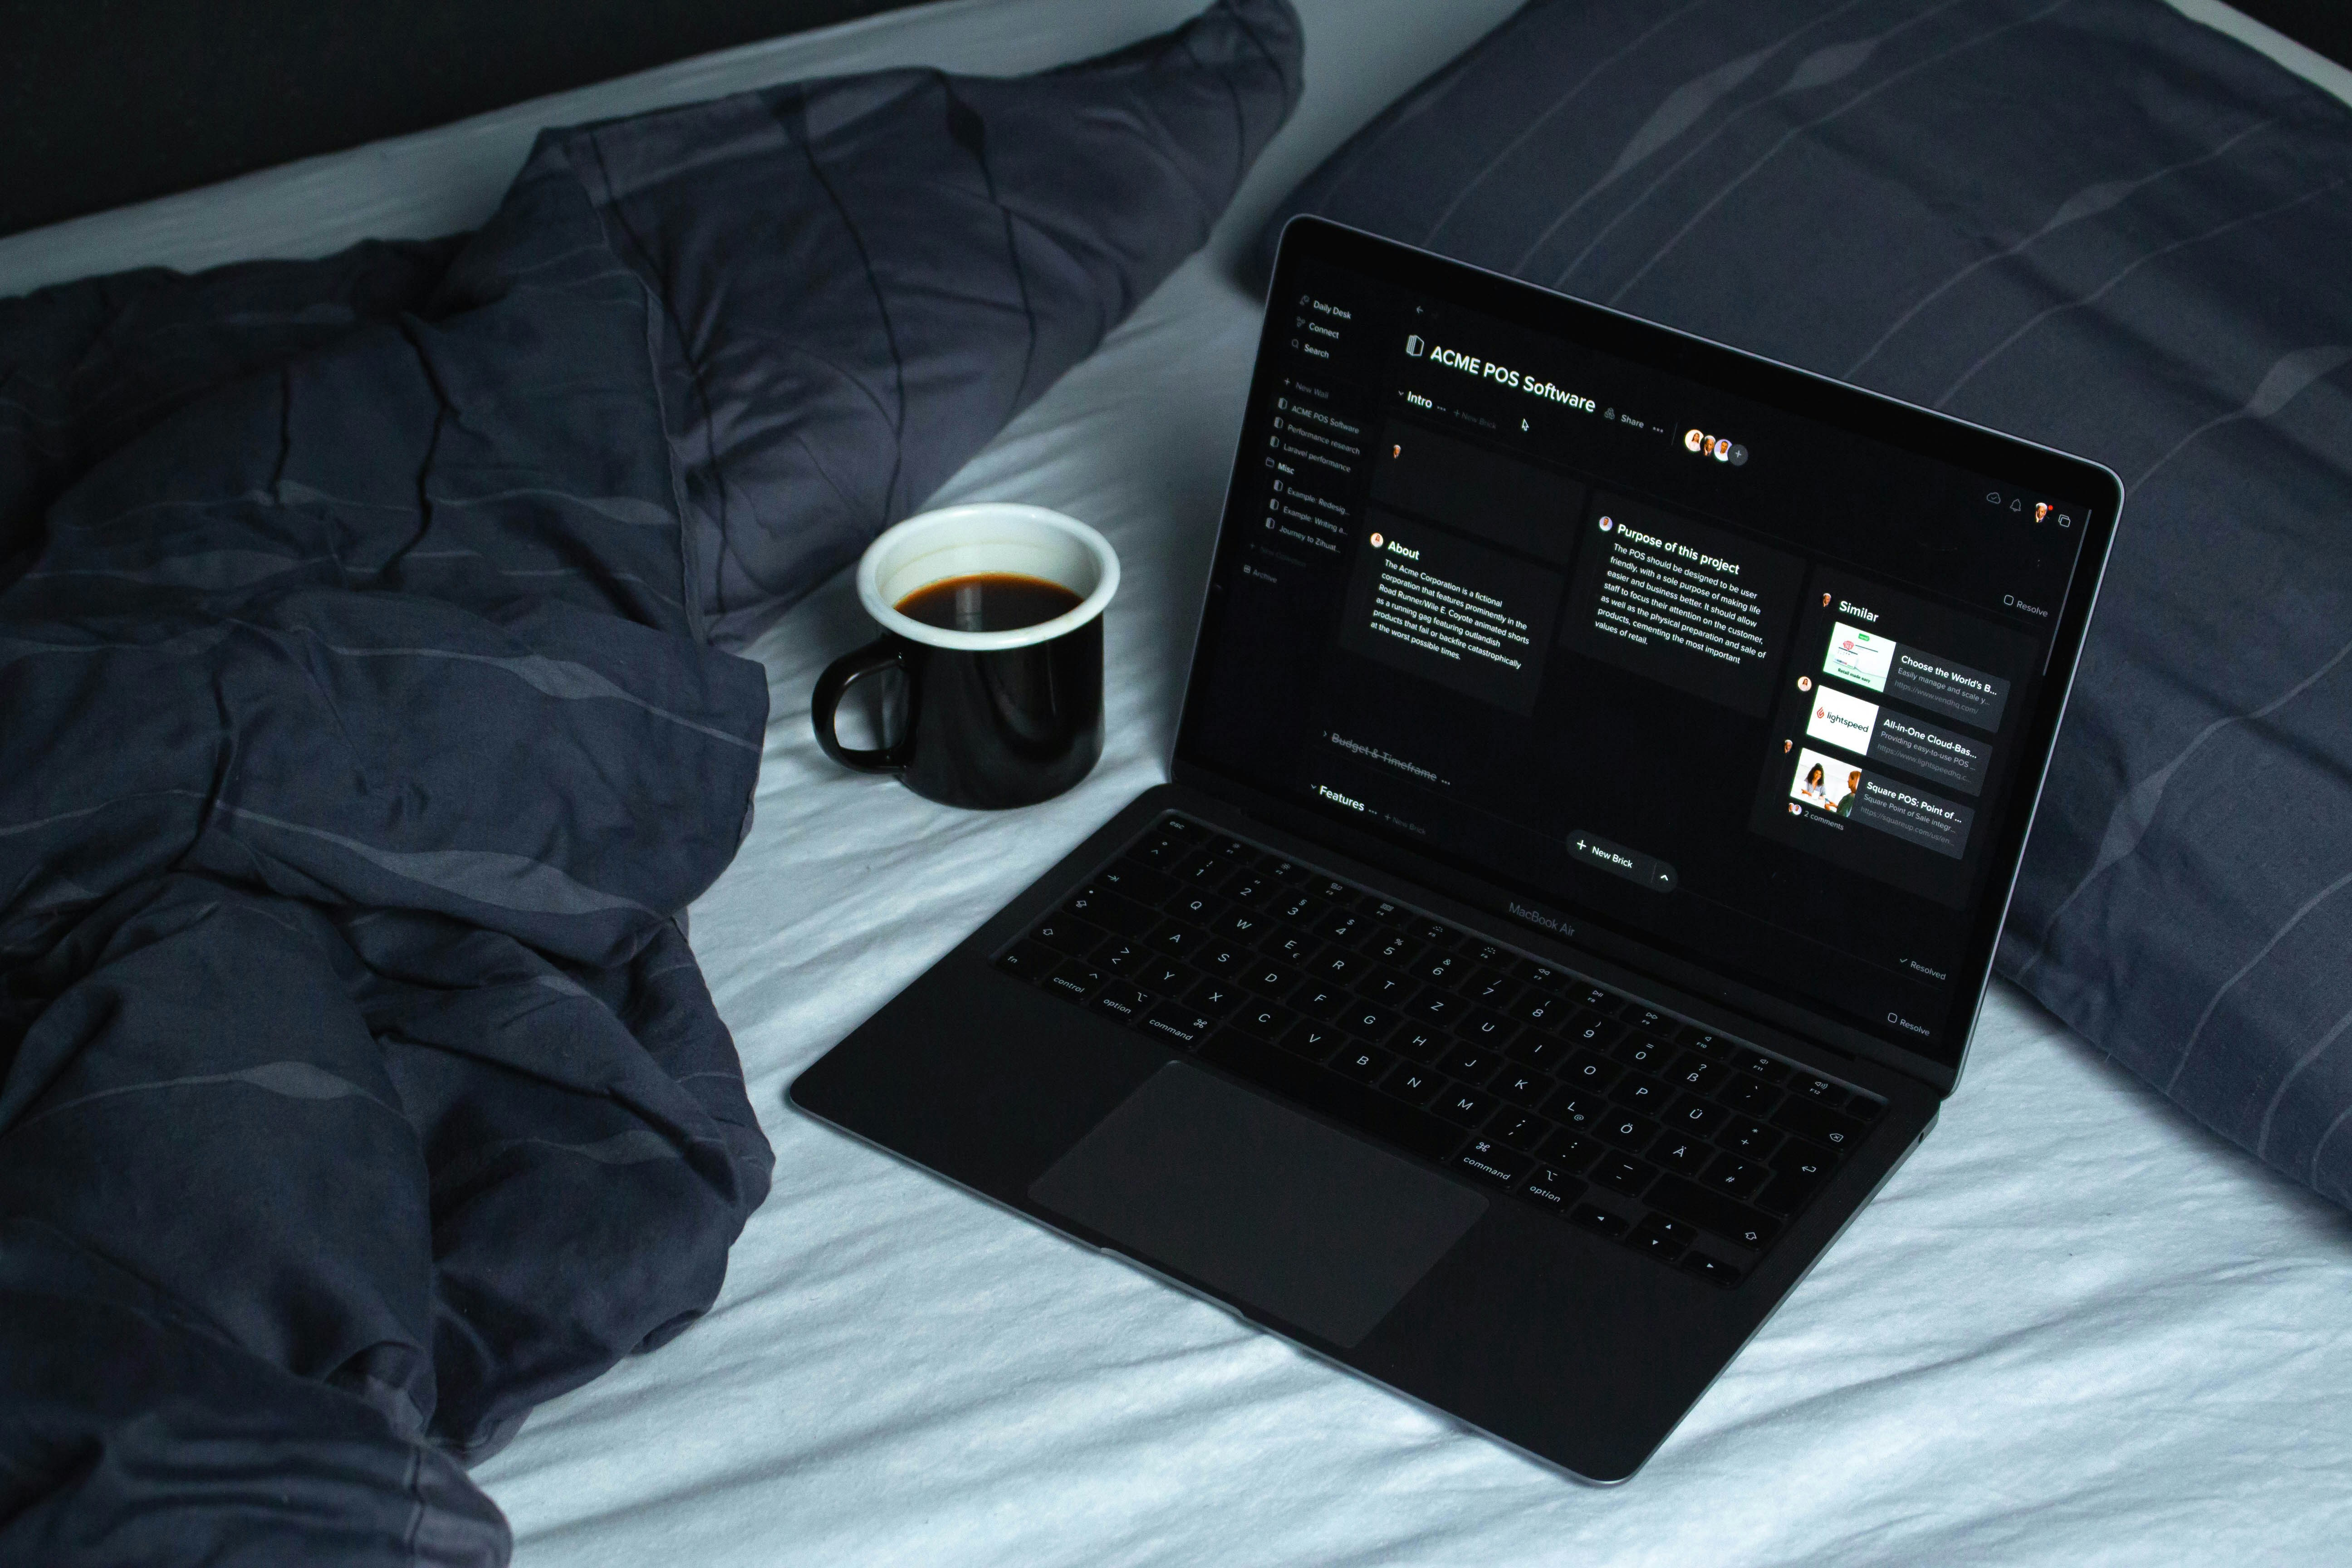 A laptop displaying a project on ACME POS Software sits on a bed next to a cup of black coffee. This cozy setup illustrates a casual working environment, ideal for those researching "Regex performance optimization and security best practices" in a relaxed setting. The dark-themed screen contrasts with the dark bedding, creating a focused ambiance for programming or studying advanced coding techniques.